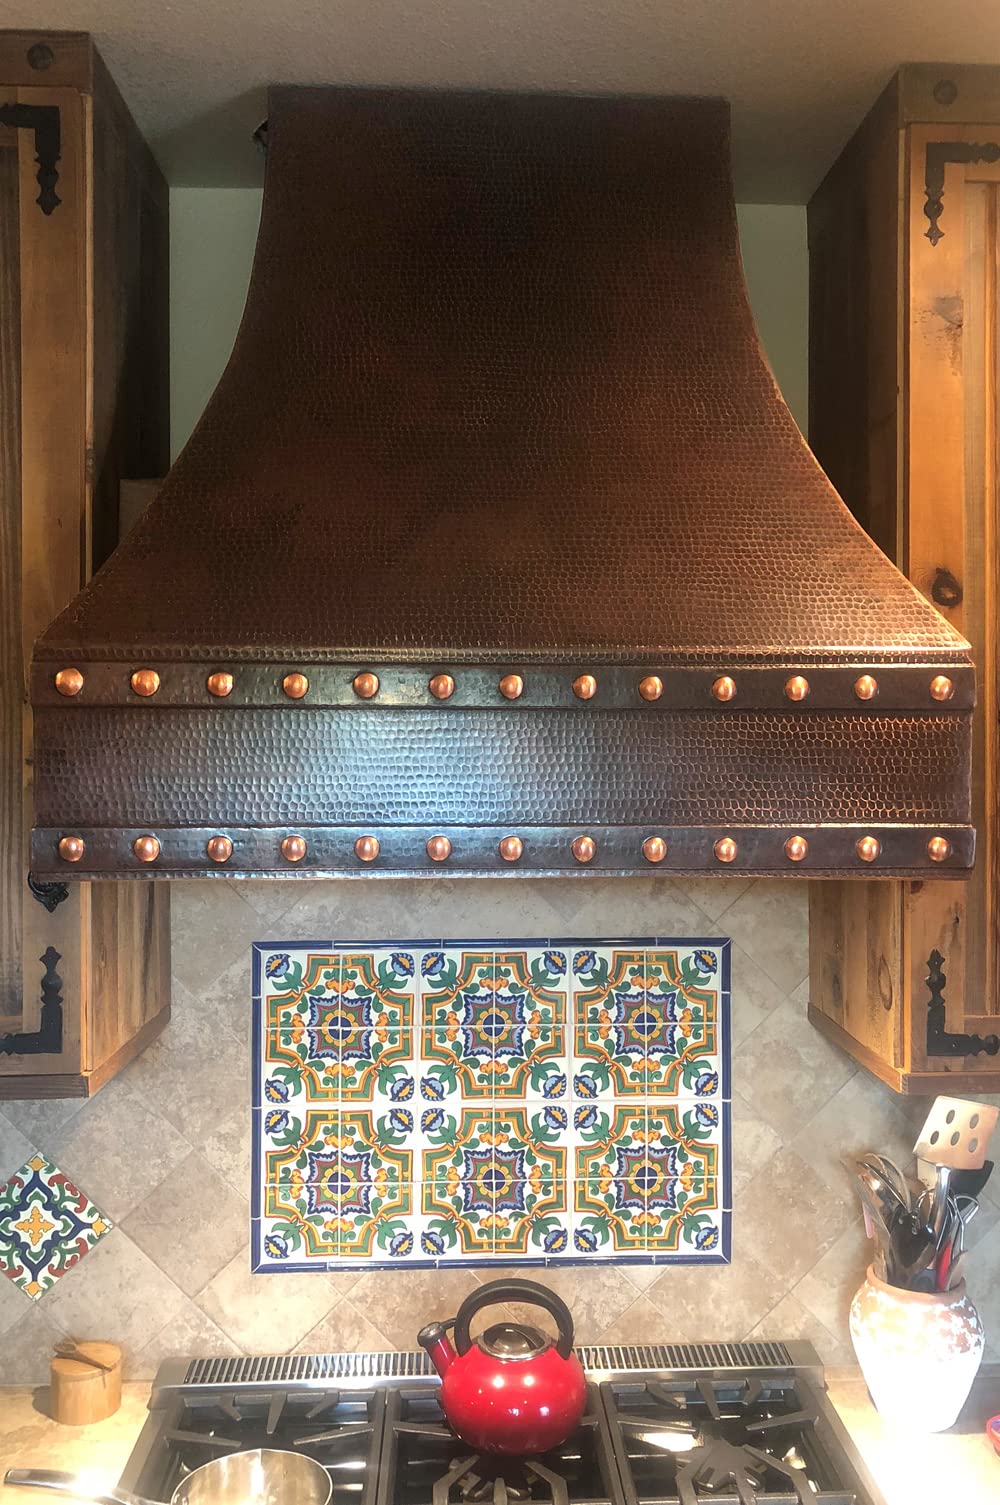 36 Inch 735 CFM Hammered Copper Wall Mounted Correa Range Hood with Slim Baffle Filters